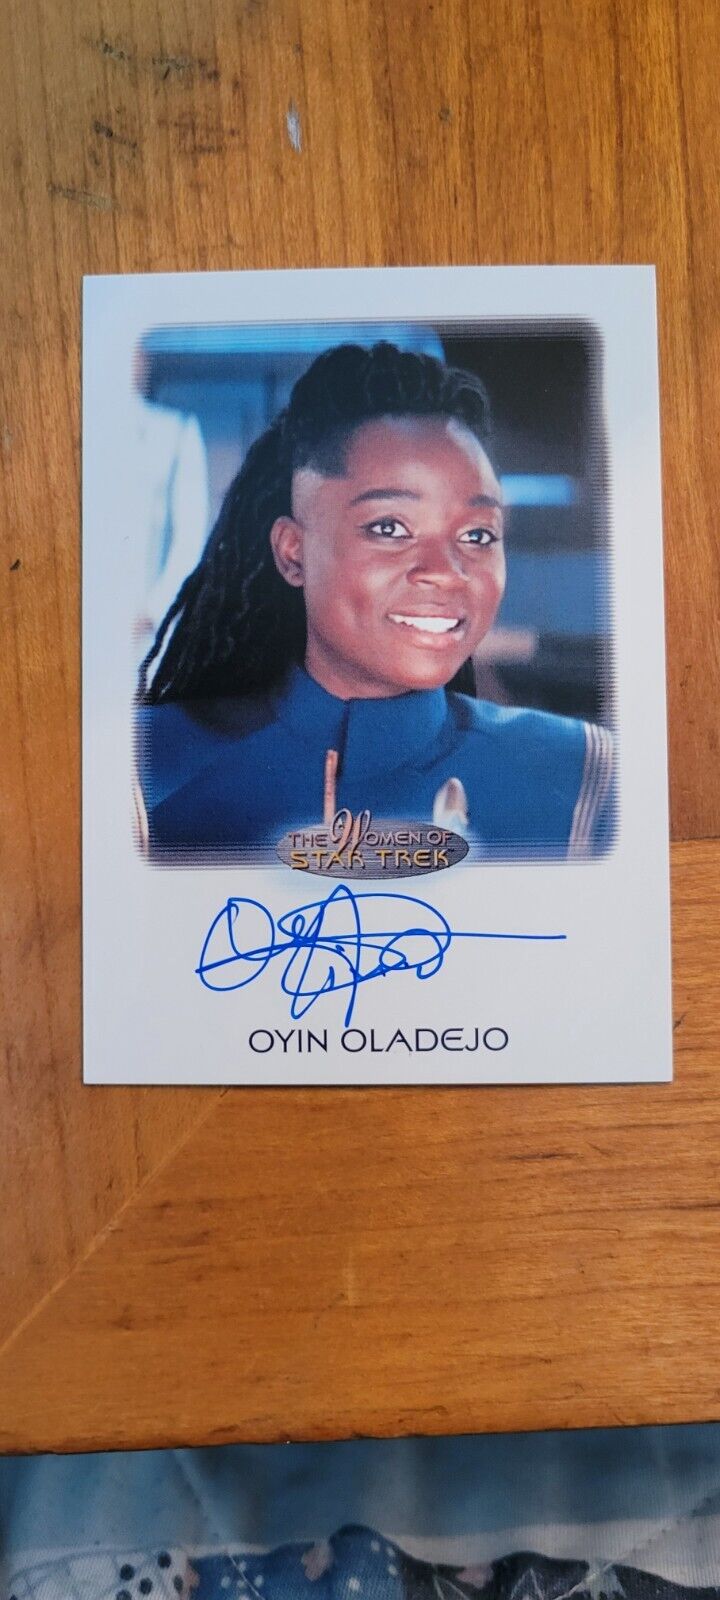 Oyin Oladejo autographed card from The Women Of Star Trek Arts & Images